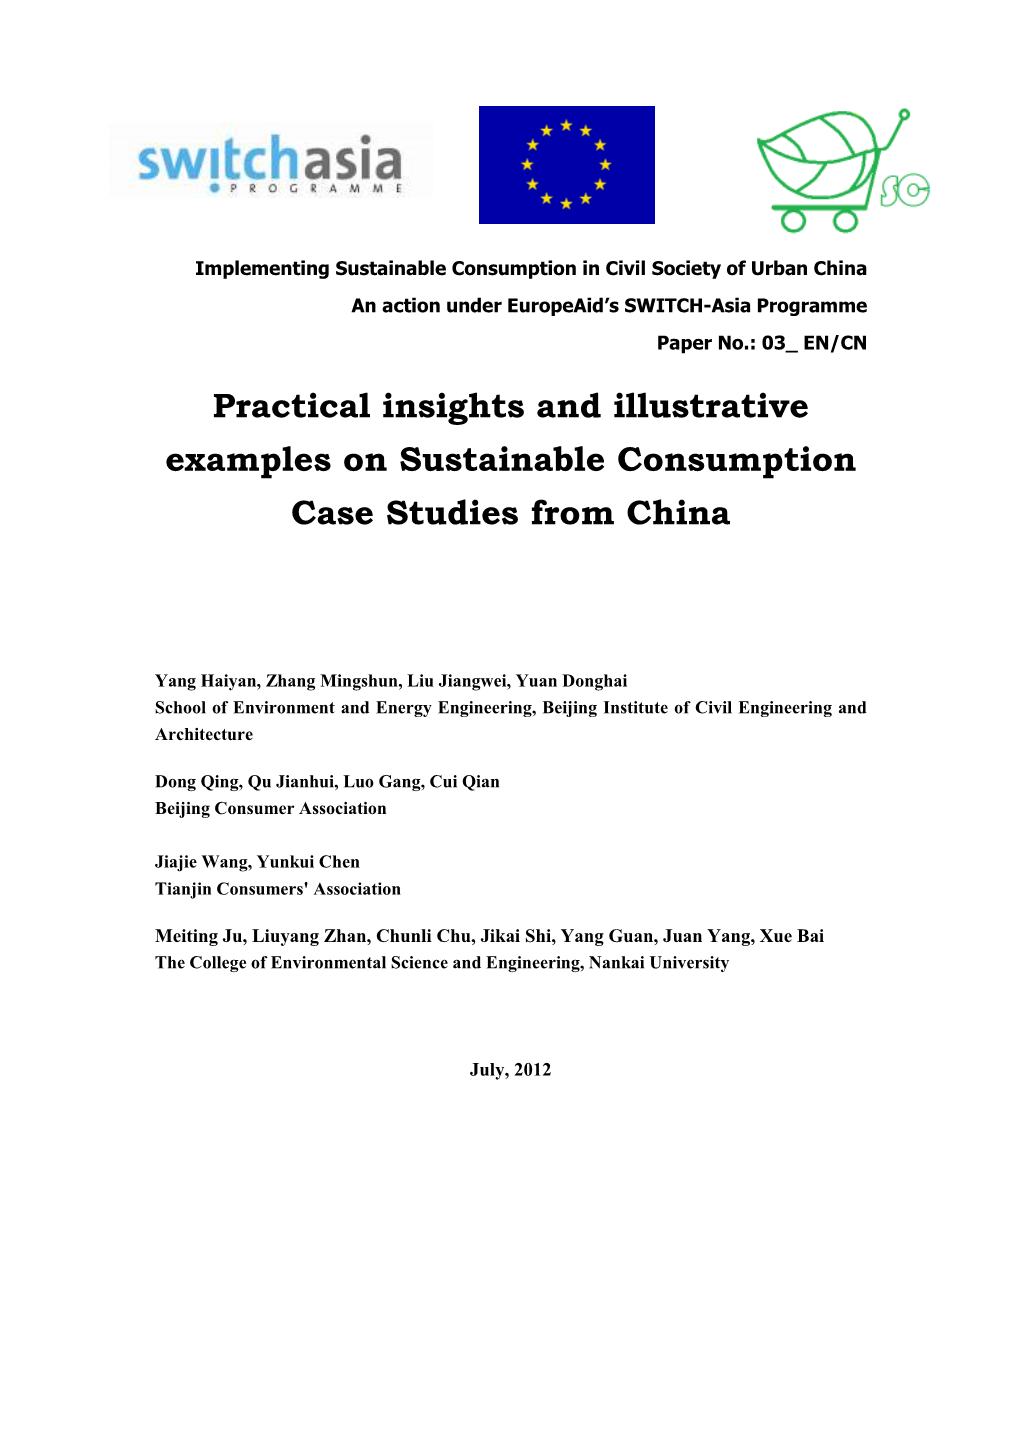 Practical Insights and Illustrative Examples on Sustainable Consumption Case Studies from China